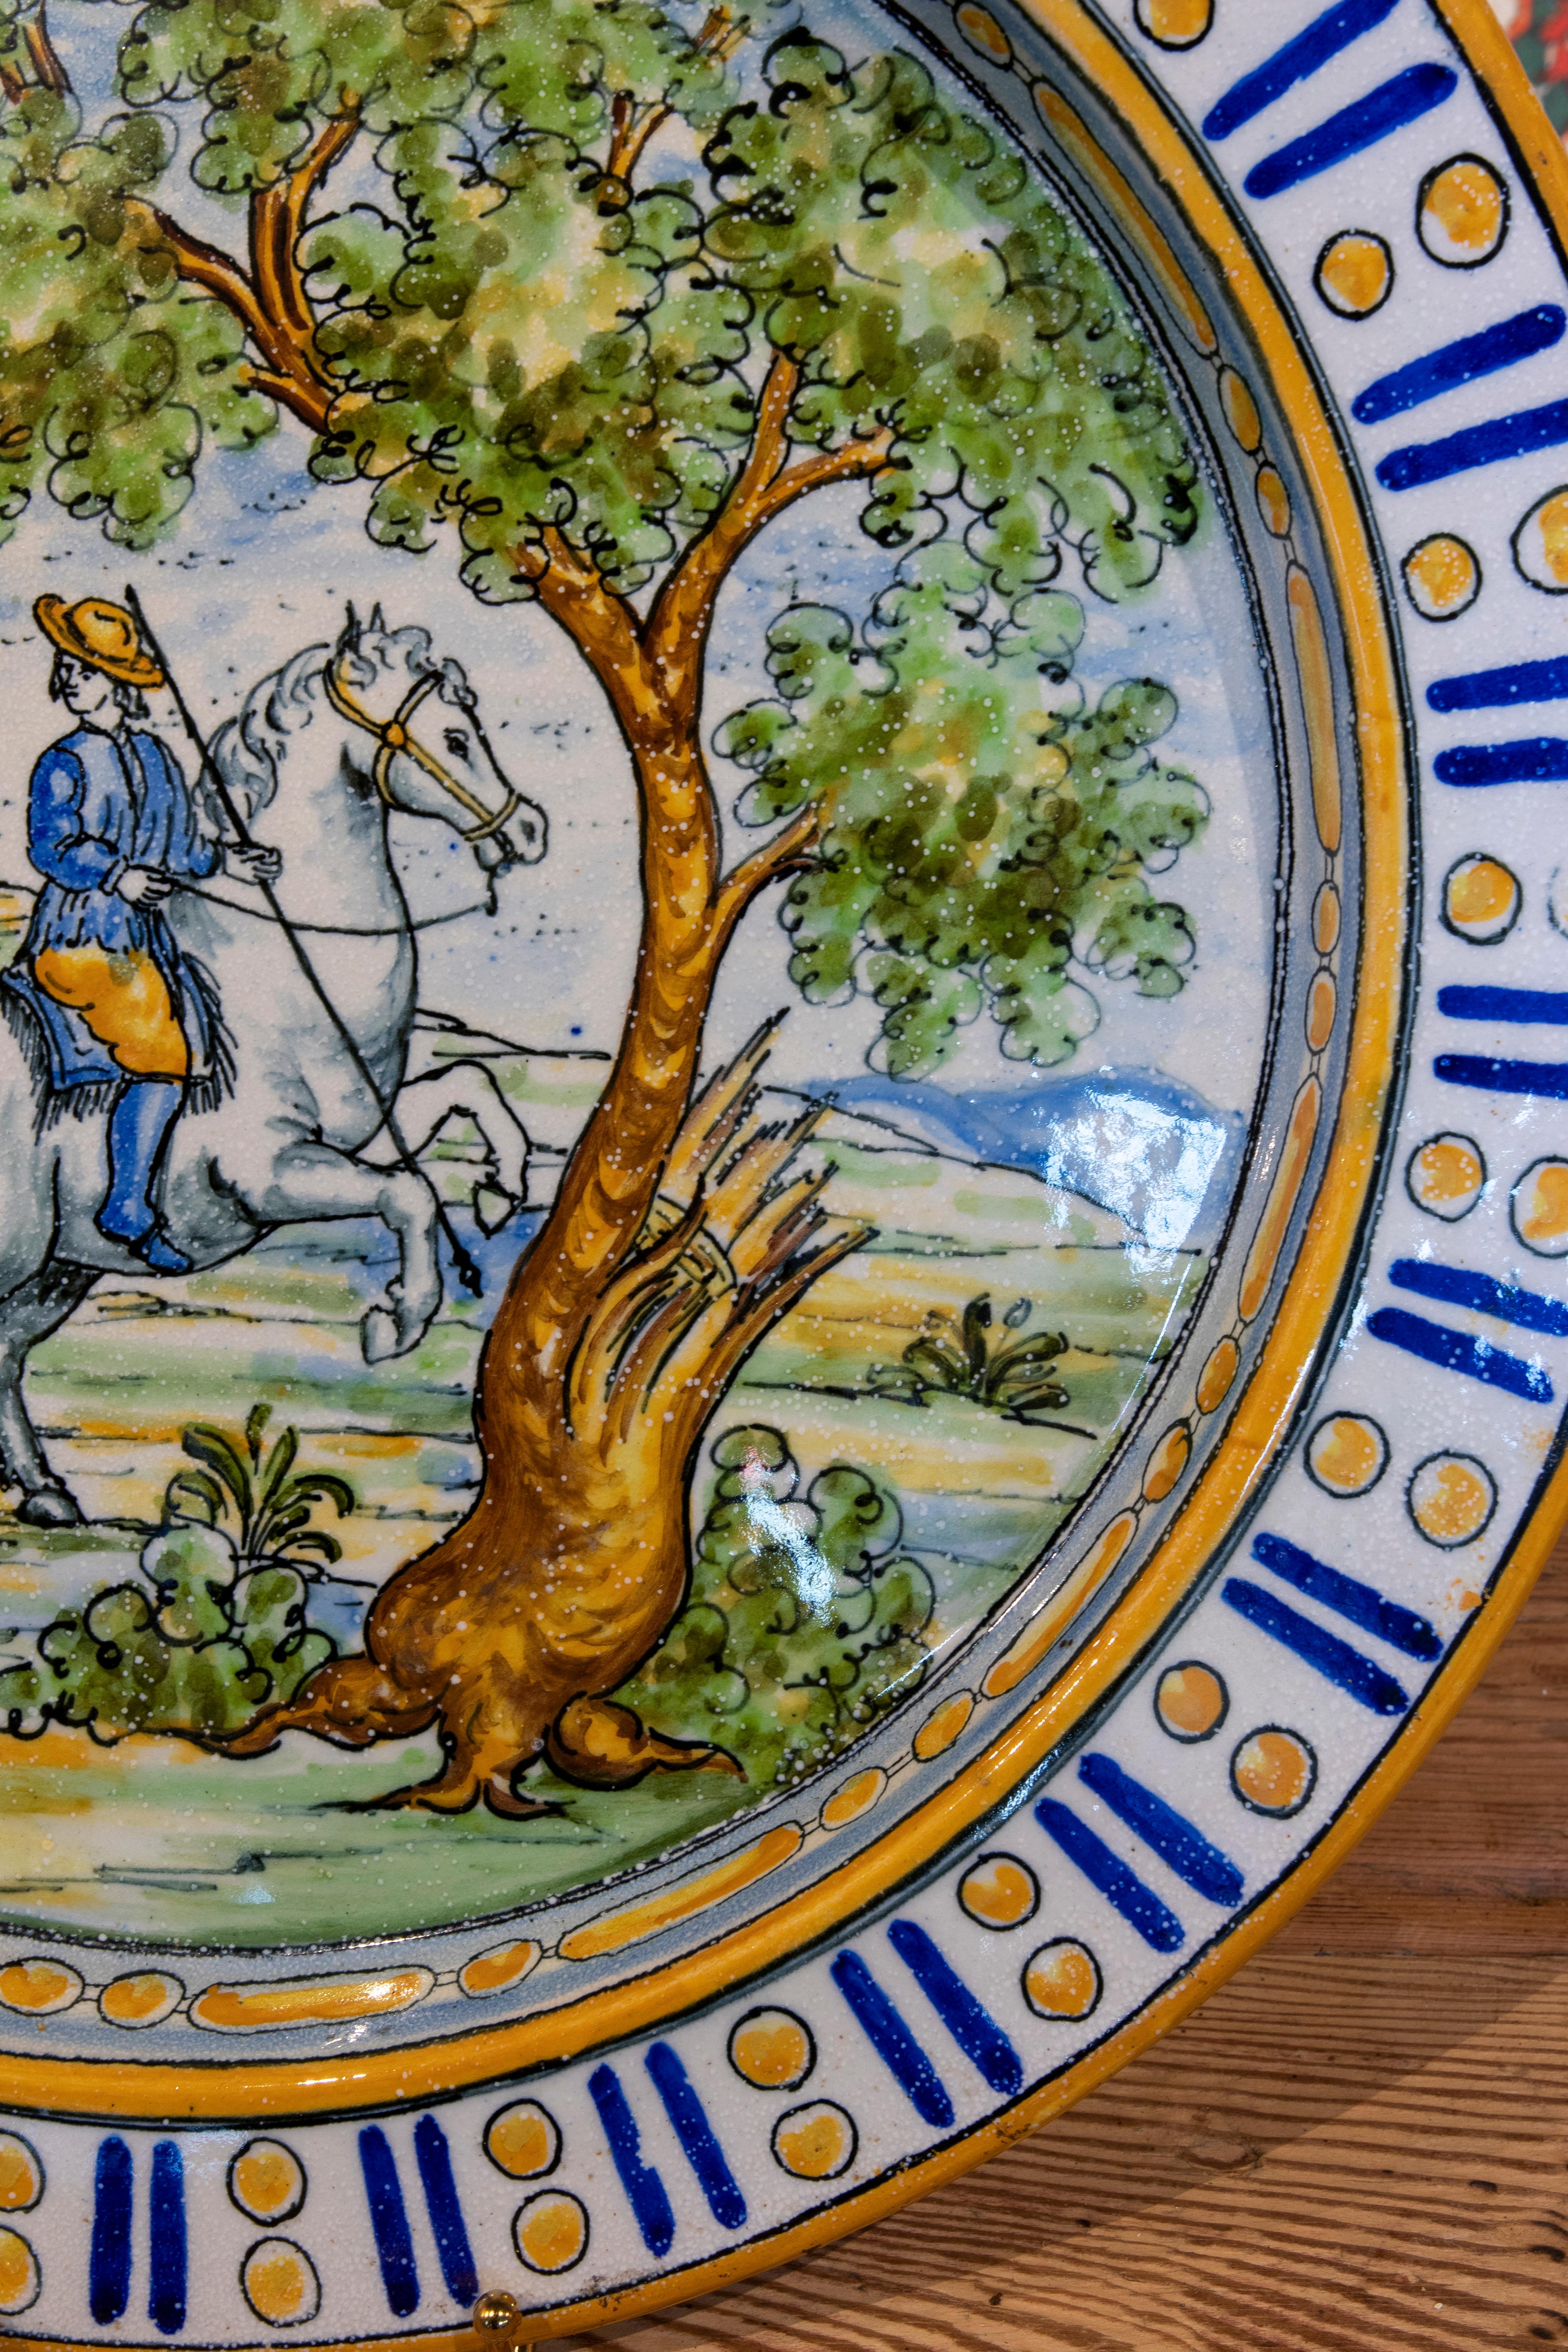 Spanish Hand-Painted Glazed Ceramic Dish with a Horse in a Field For Sale 2